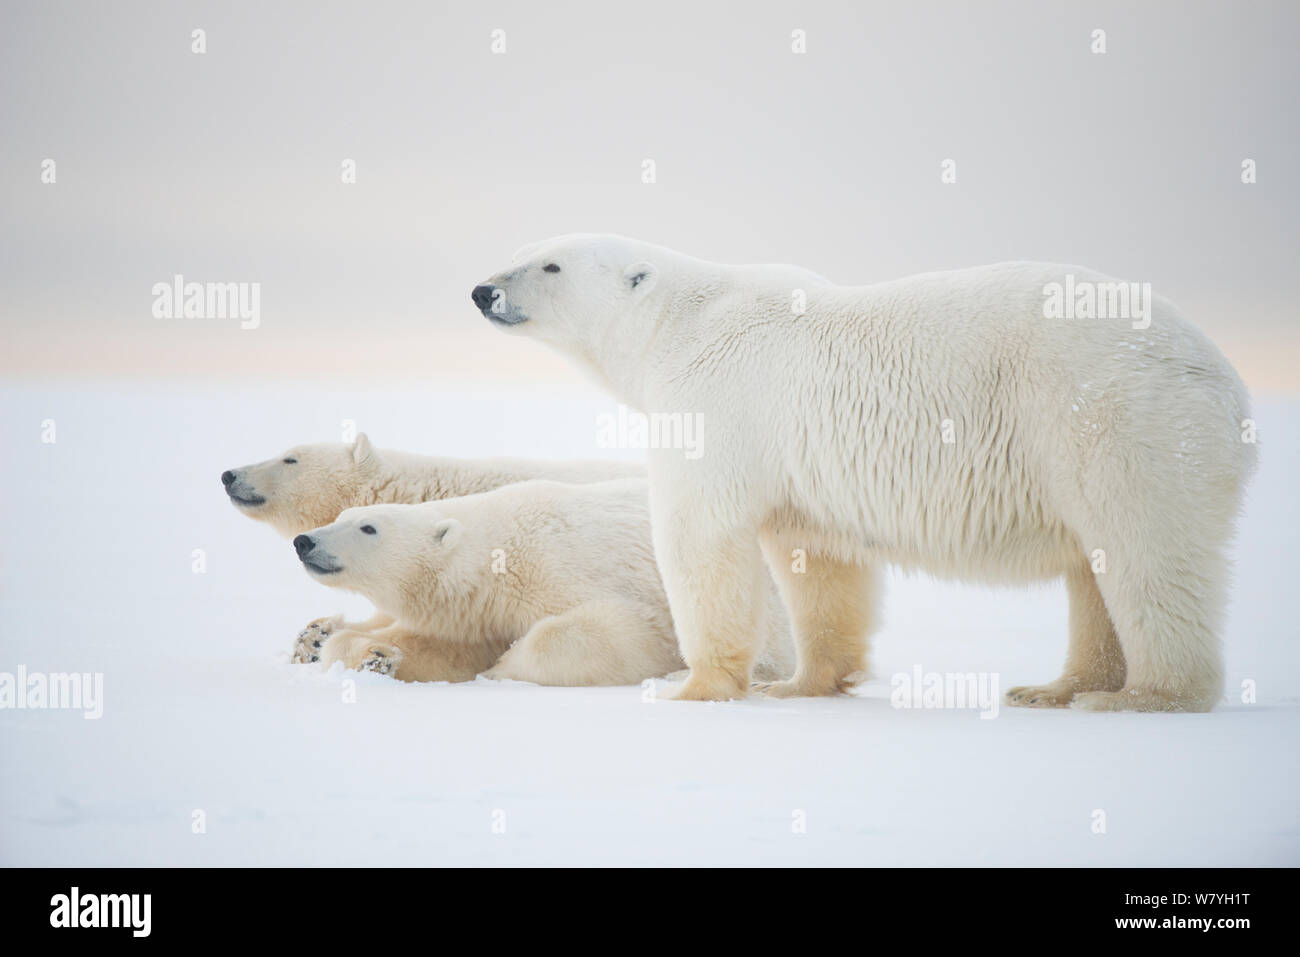 Polar bear (Ursus maritimus) mother with  juveniles resting on newly formed pack ice during autumn freeze up, Beaufort Sea, off Arctic coast, Alaska Stock Photo